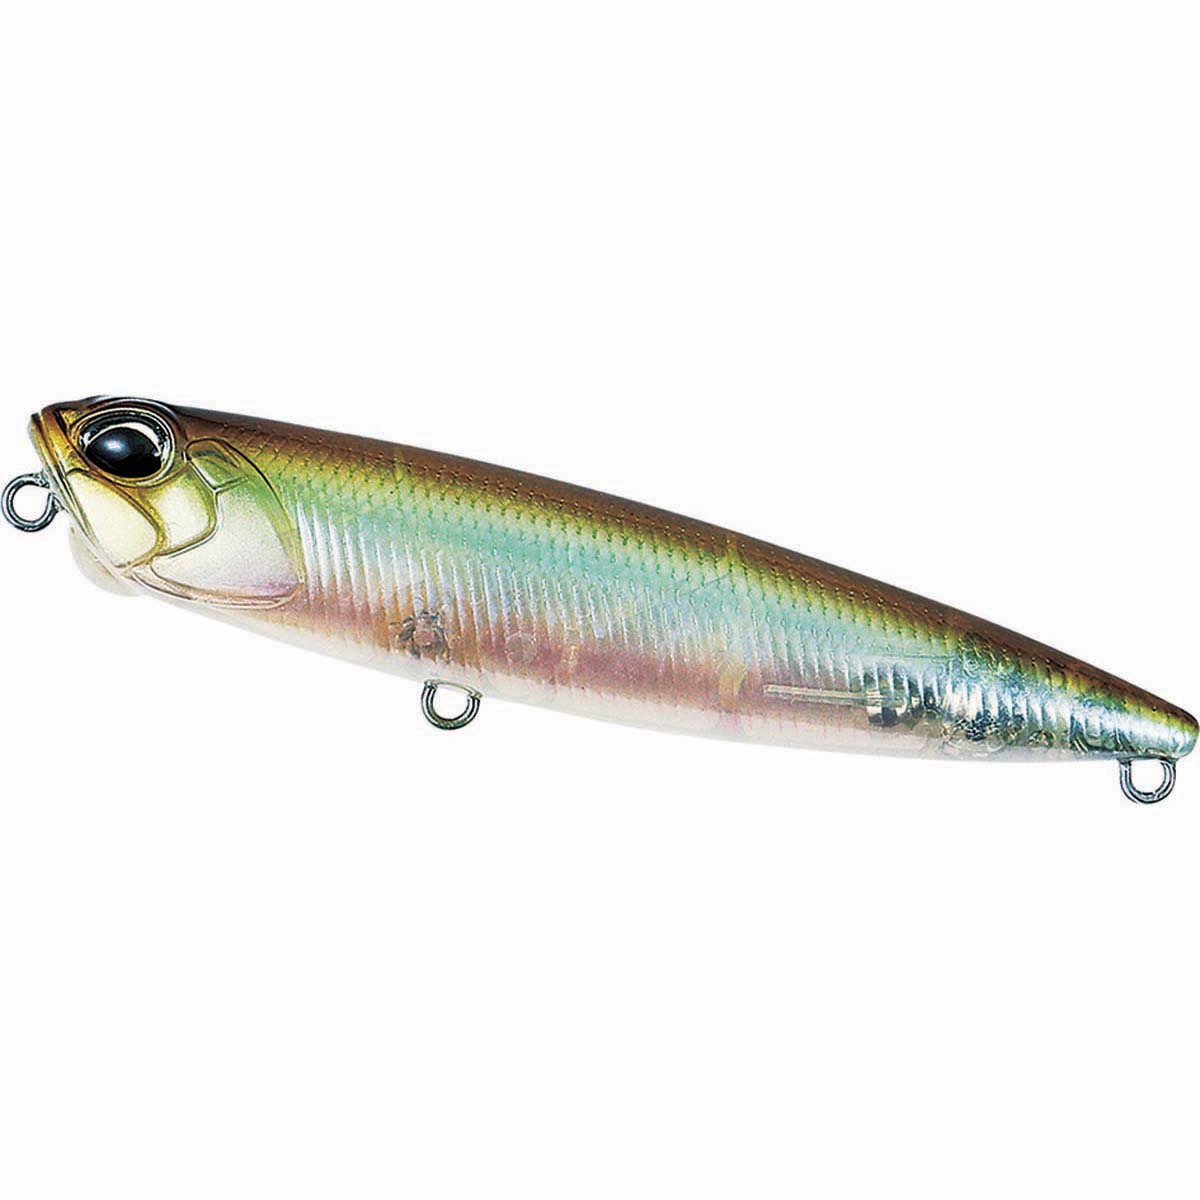 Duo Realis Pencil 6.5cm Lure Ghost Minnow